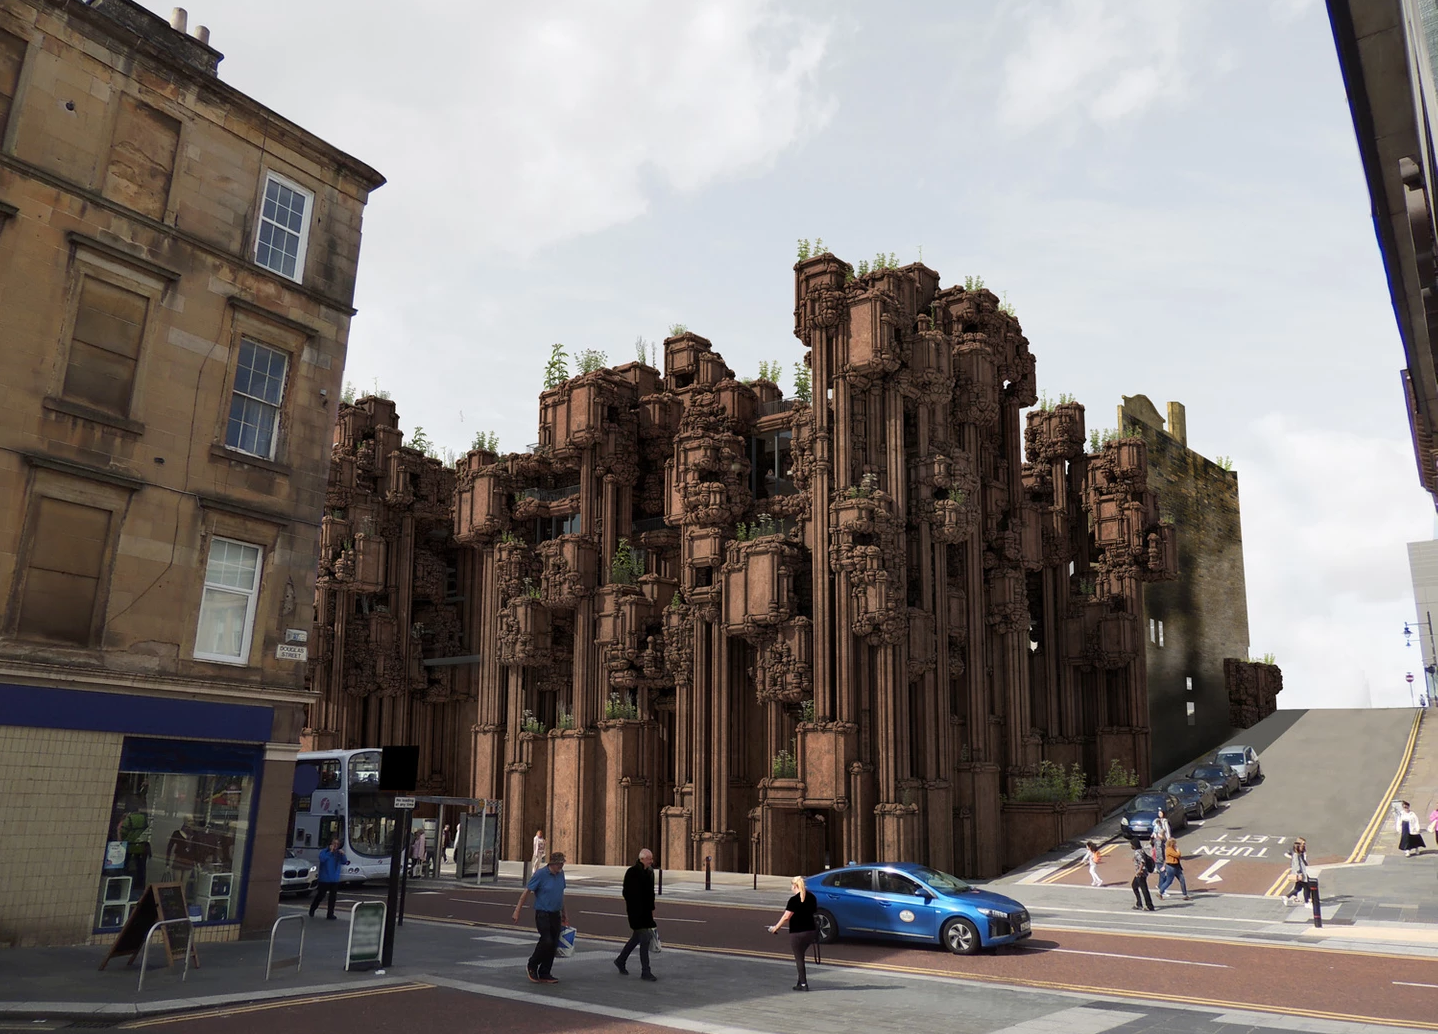 And finally... Extend Glasgow School of Art onto site of former music venue, suggests architect